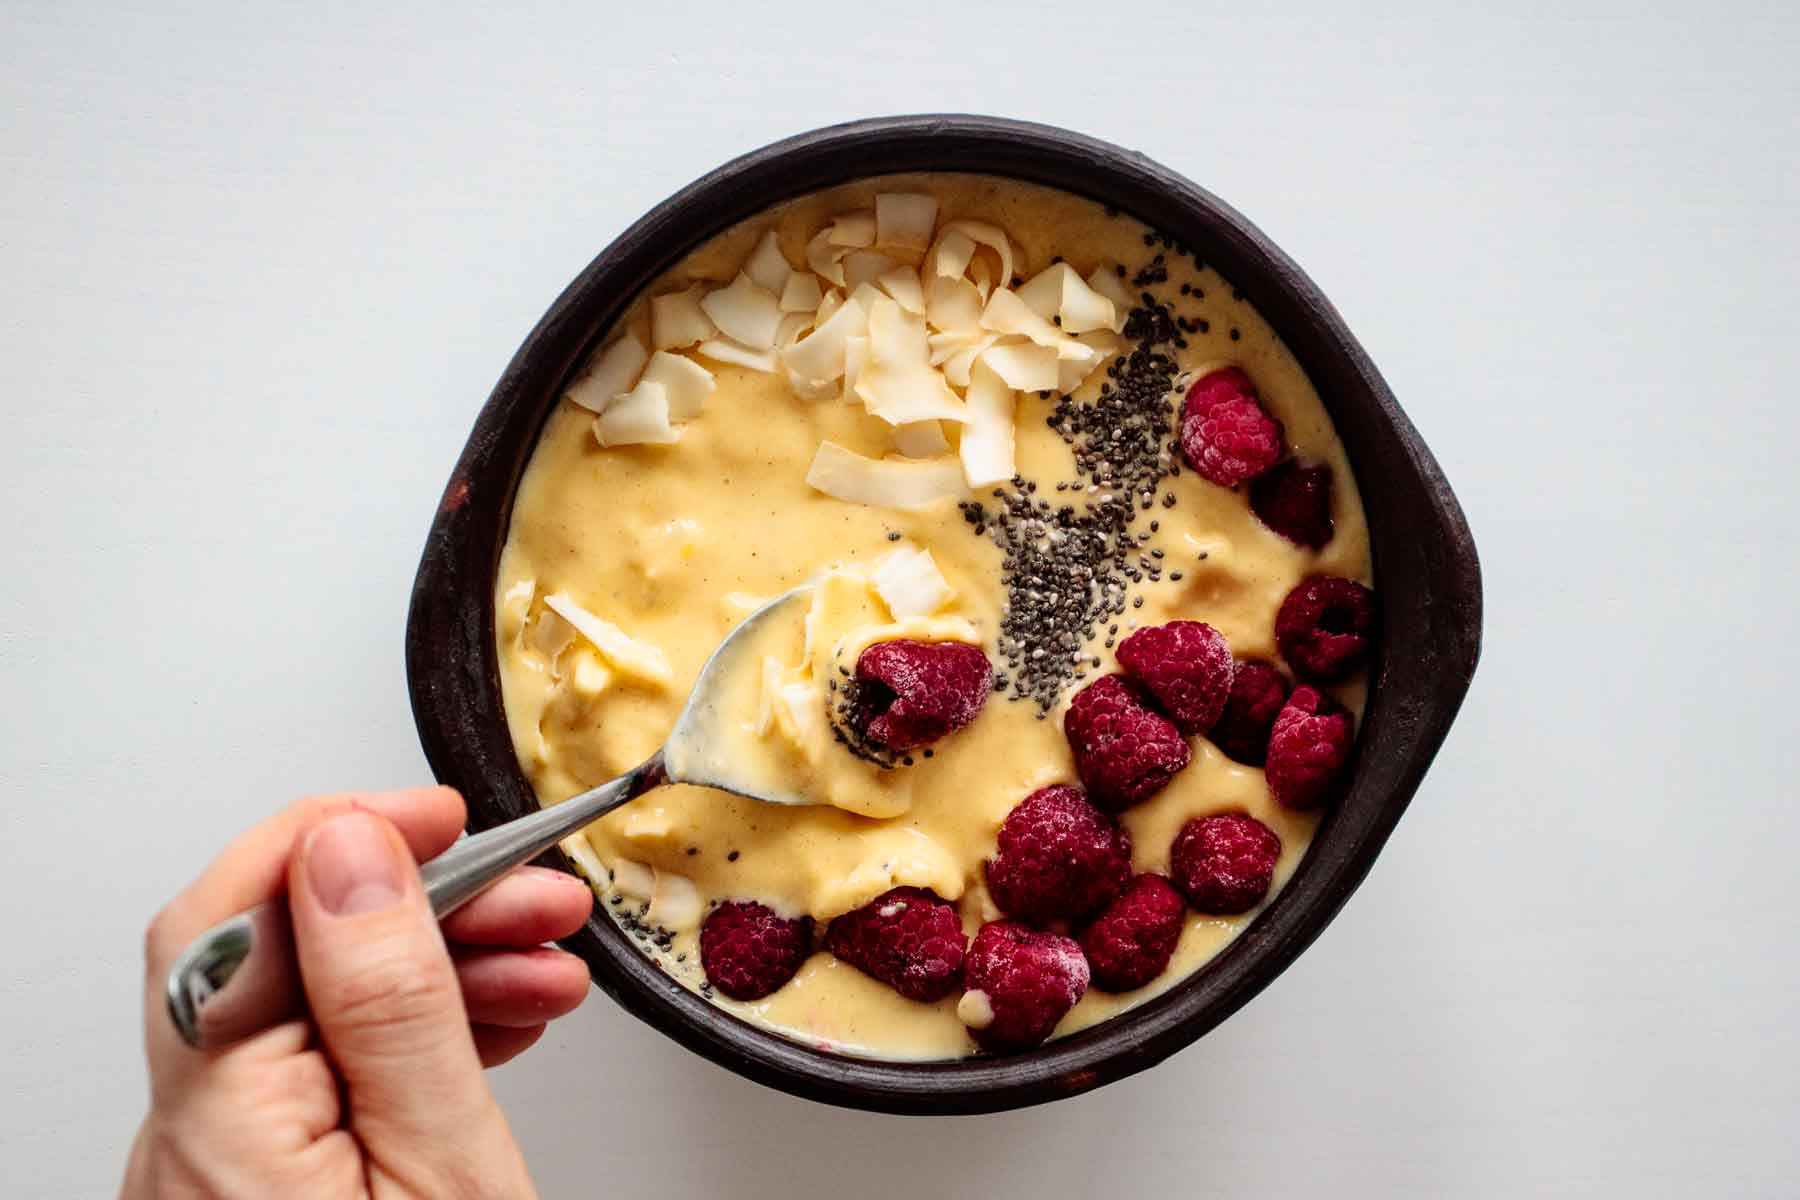 spoon scooping a breakfast bowl, with raspberry, chia and coconut flakes on top